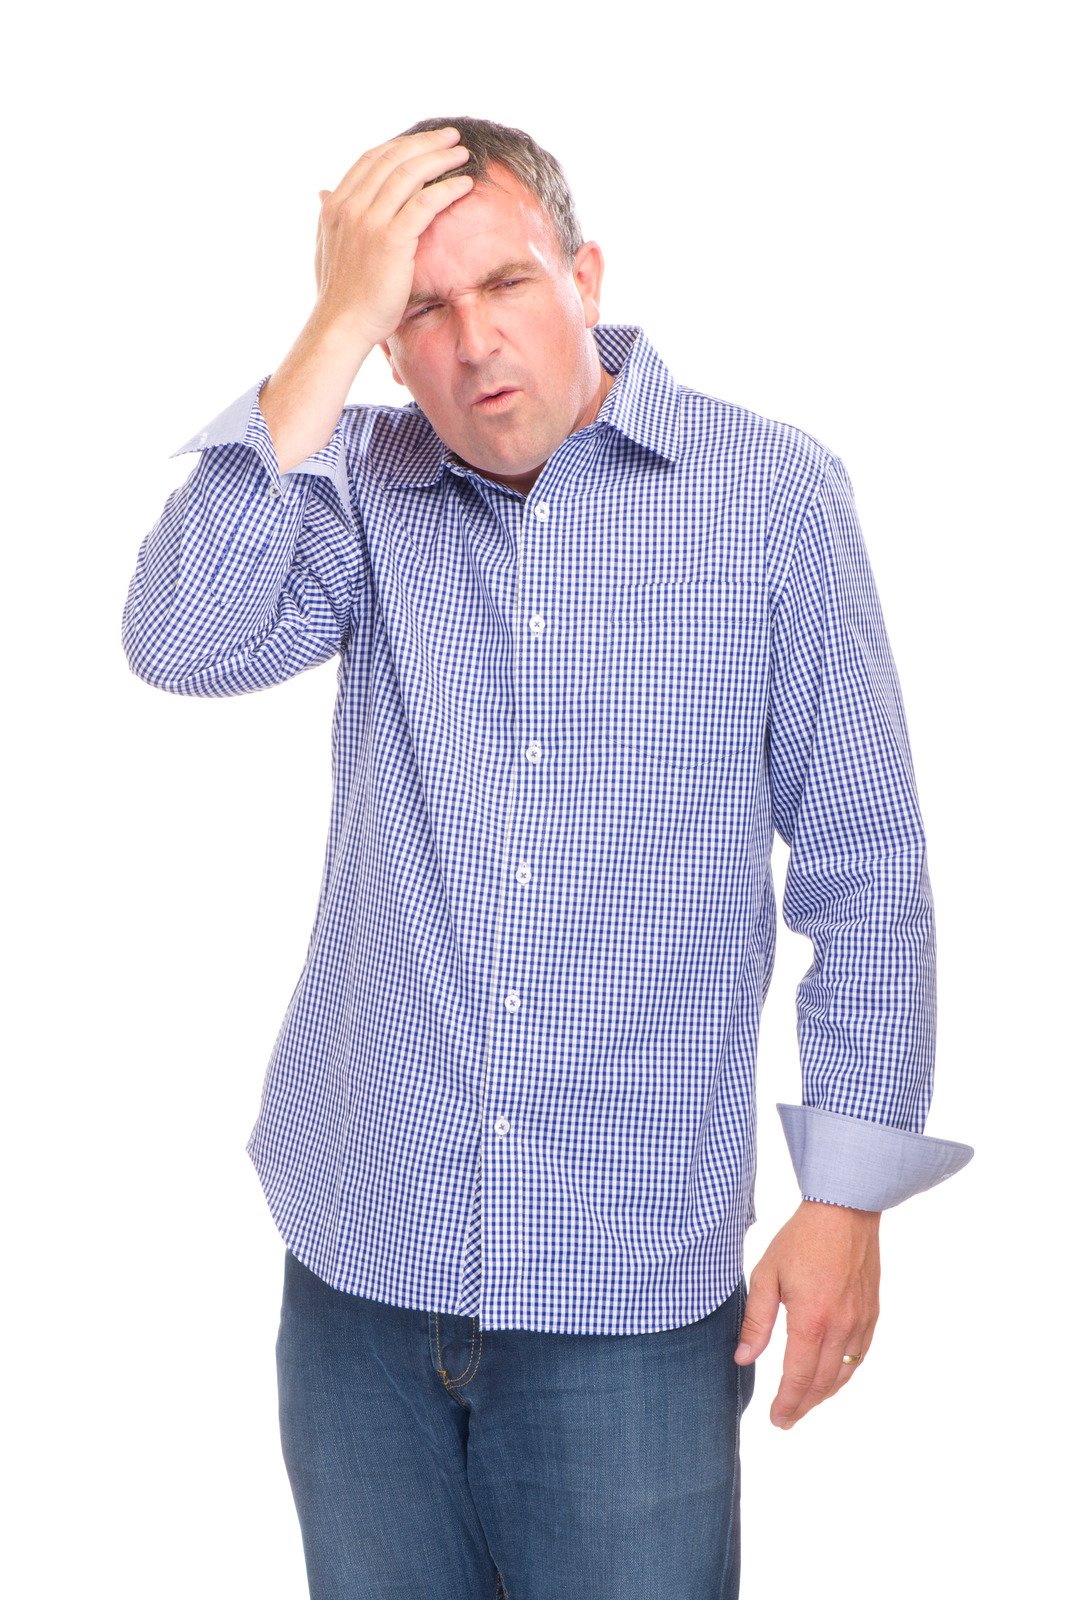 Can Stomach Ulcers Cause Headaches And Dizziness?